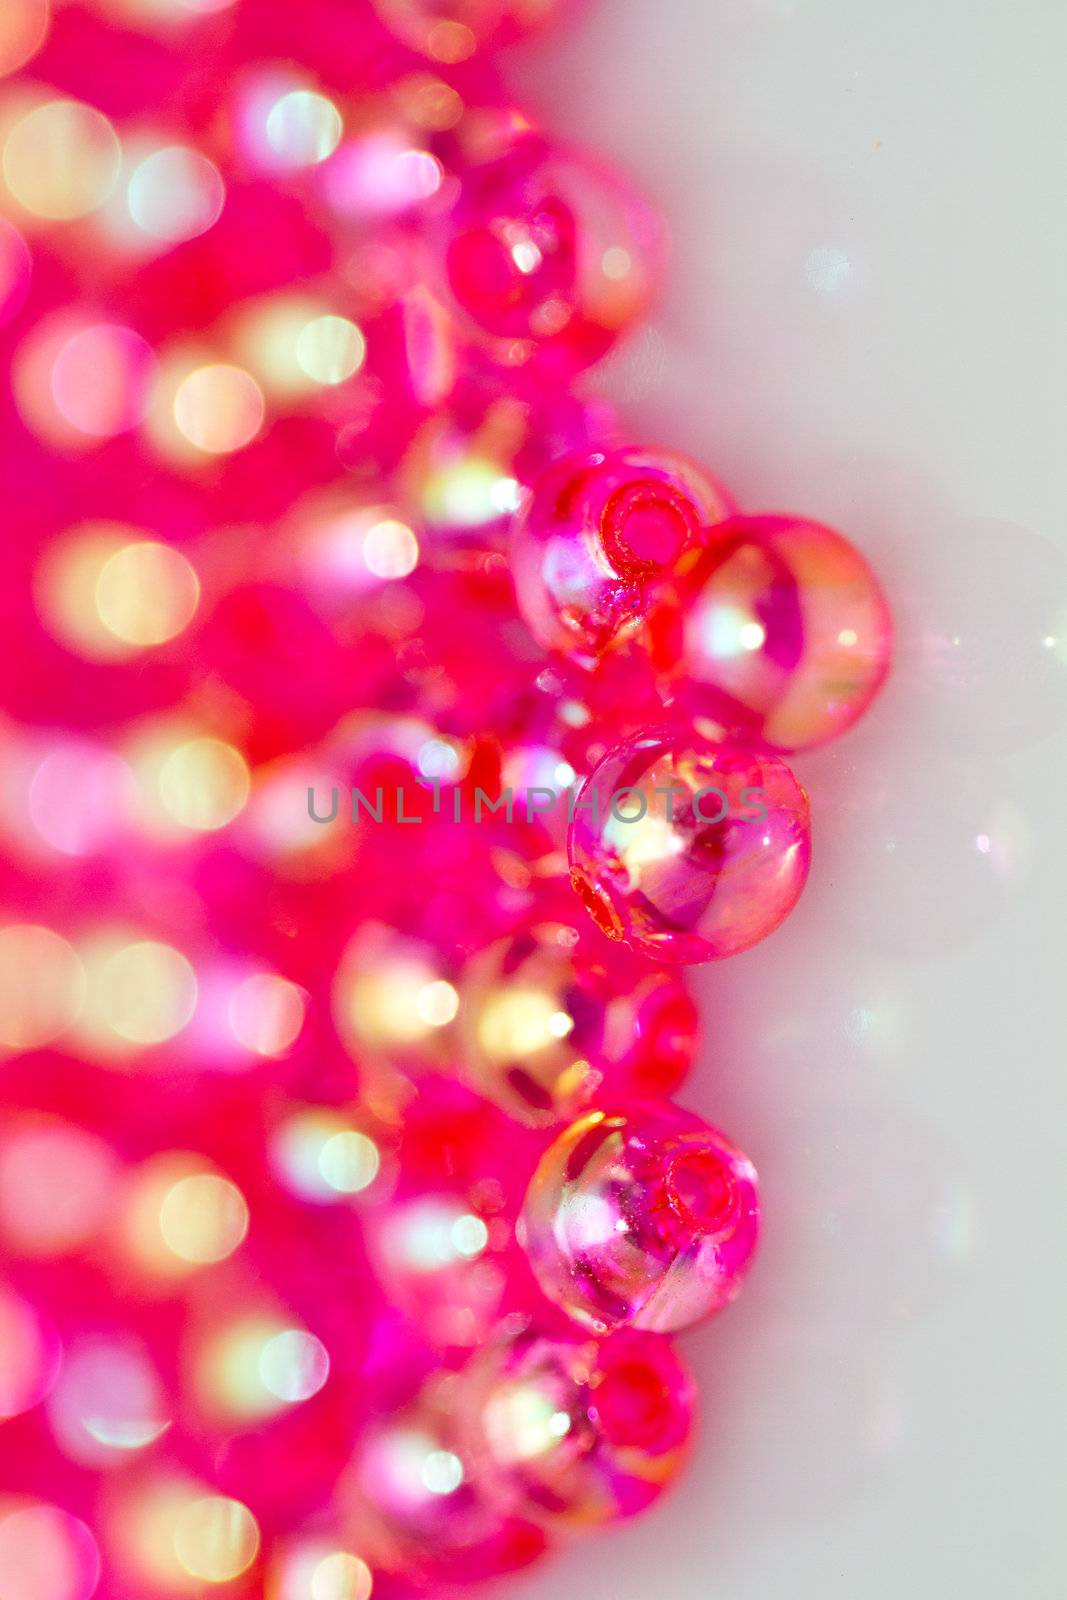 refkecting red beads background by azamshah72